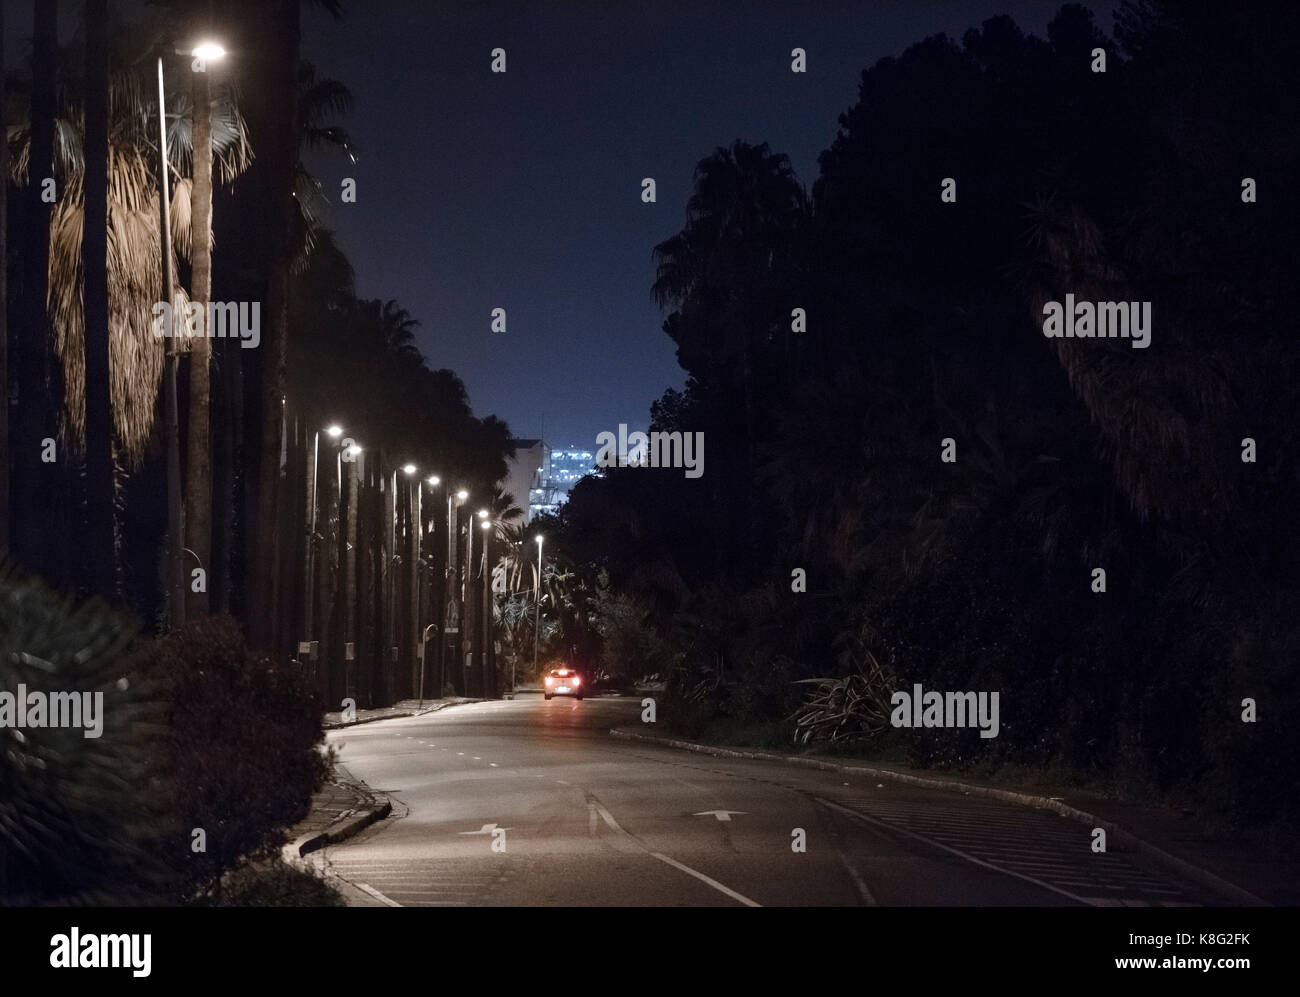 Car break lights and street lamps on city road at night, Barcelona, Spain Stock Photo